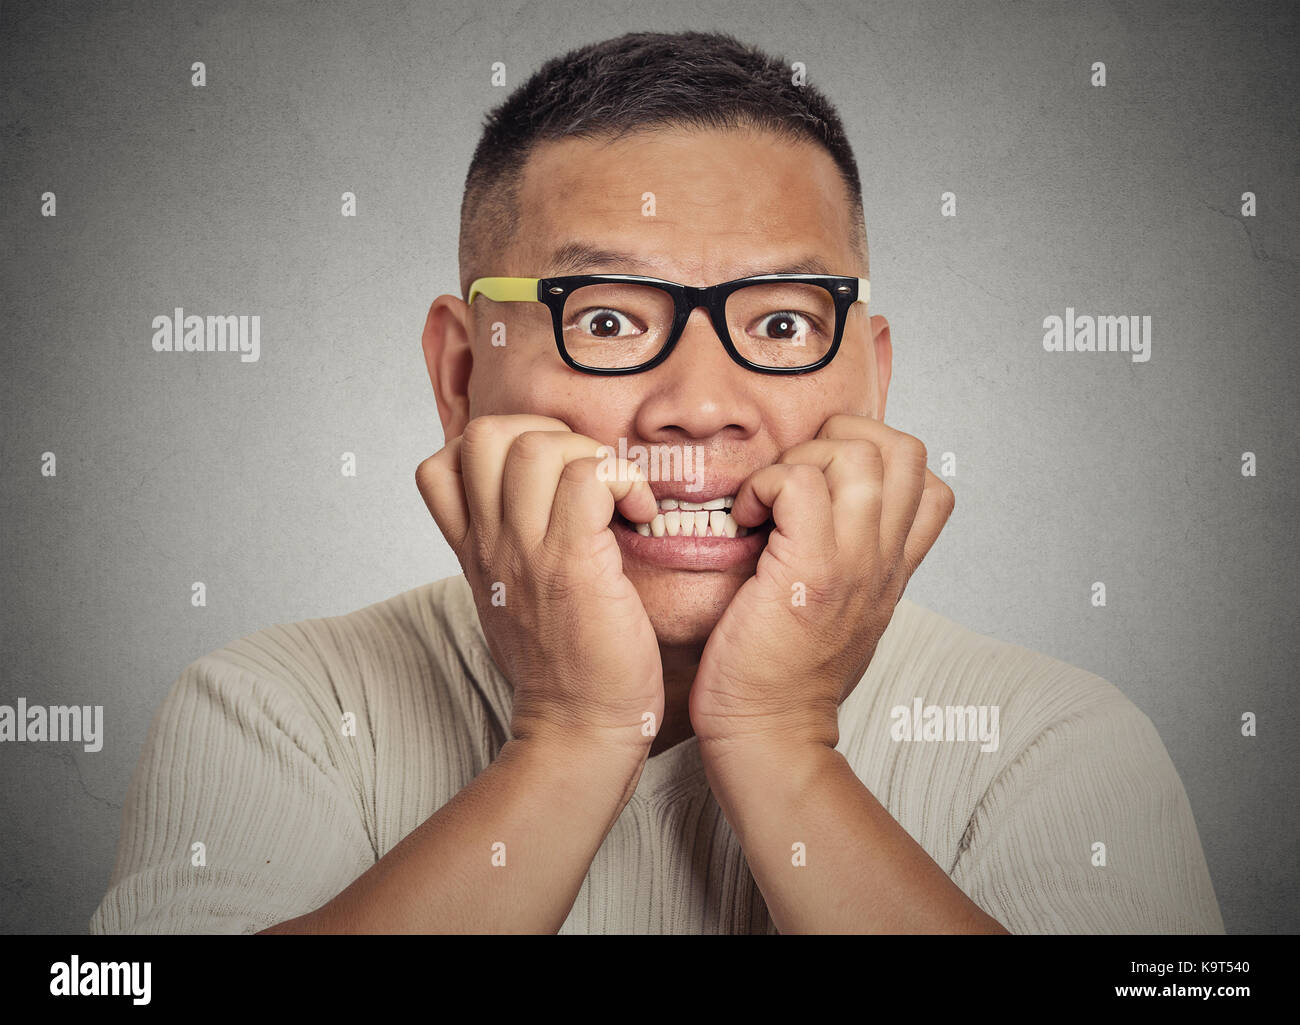 Closeup portrait headshot nerdy young guy with glasses biting his nails looking at you with craving for something or anxious isolated on grey wall bac Stock Photo